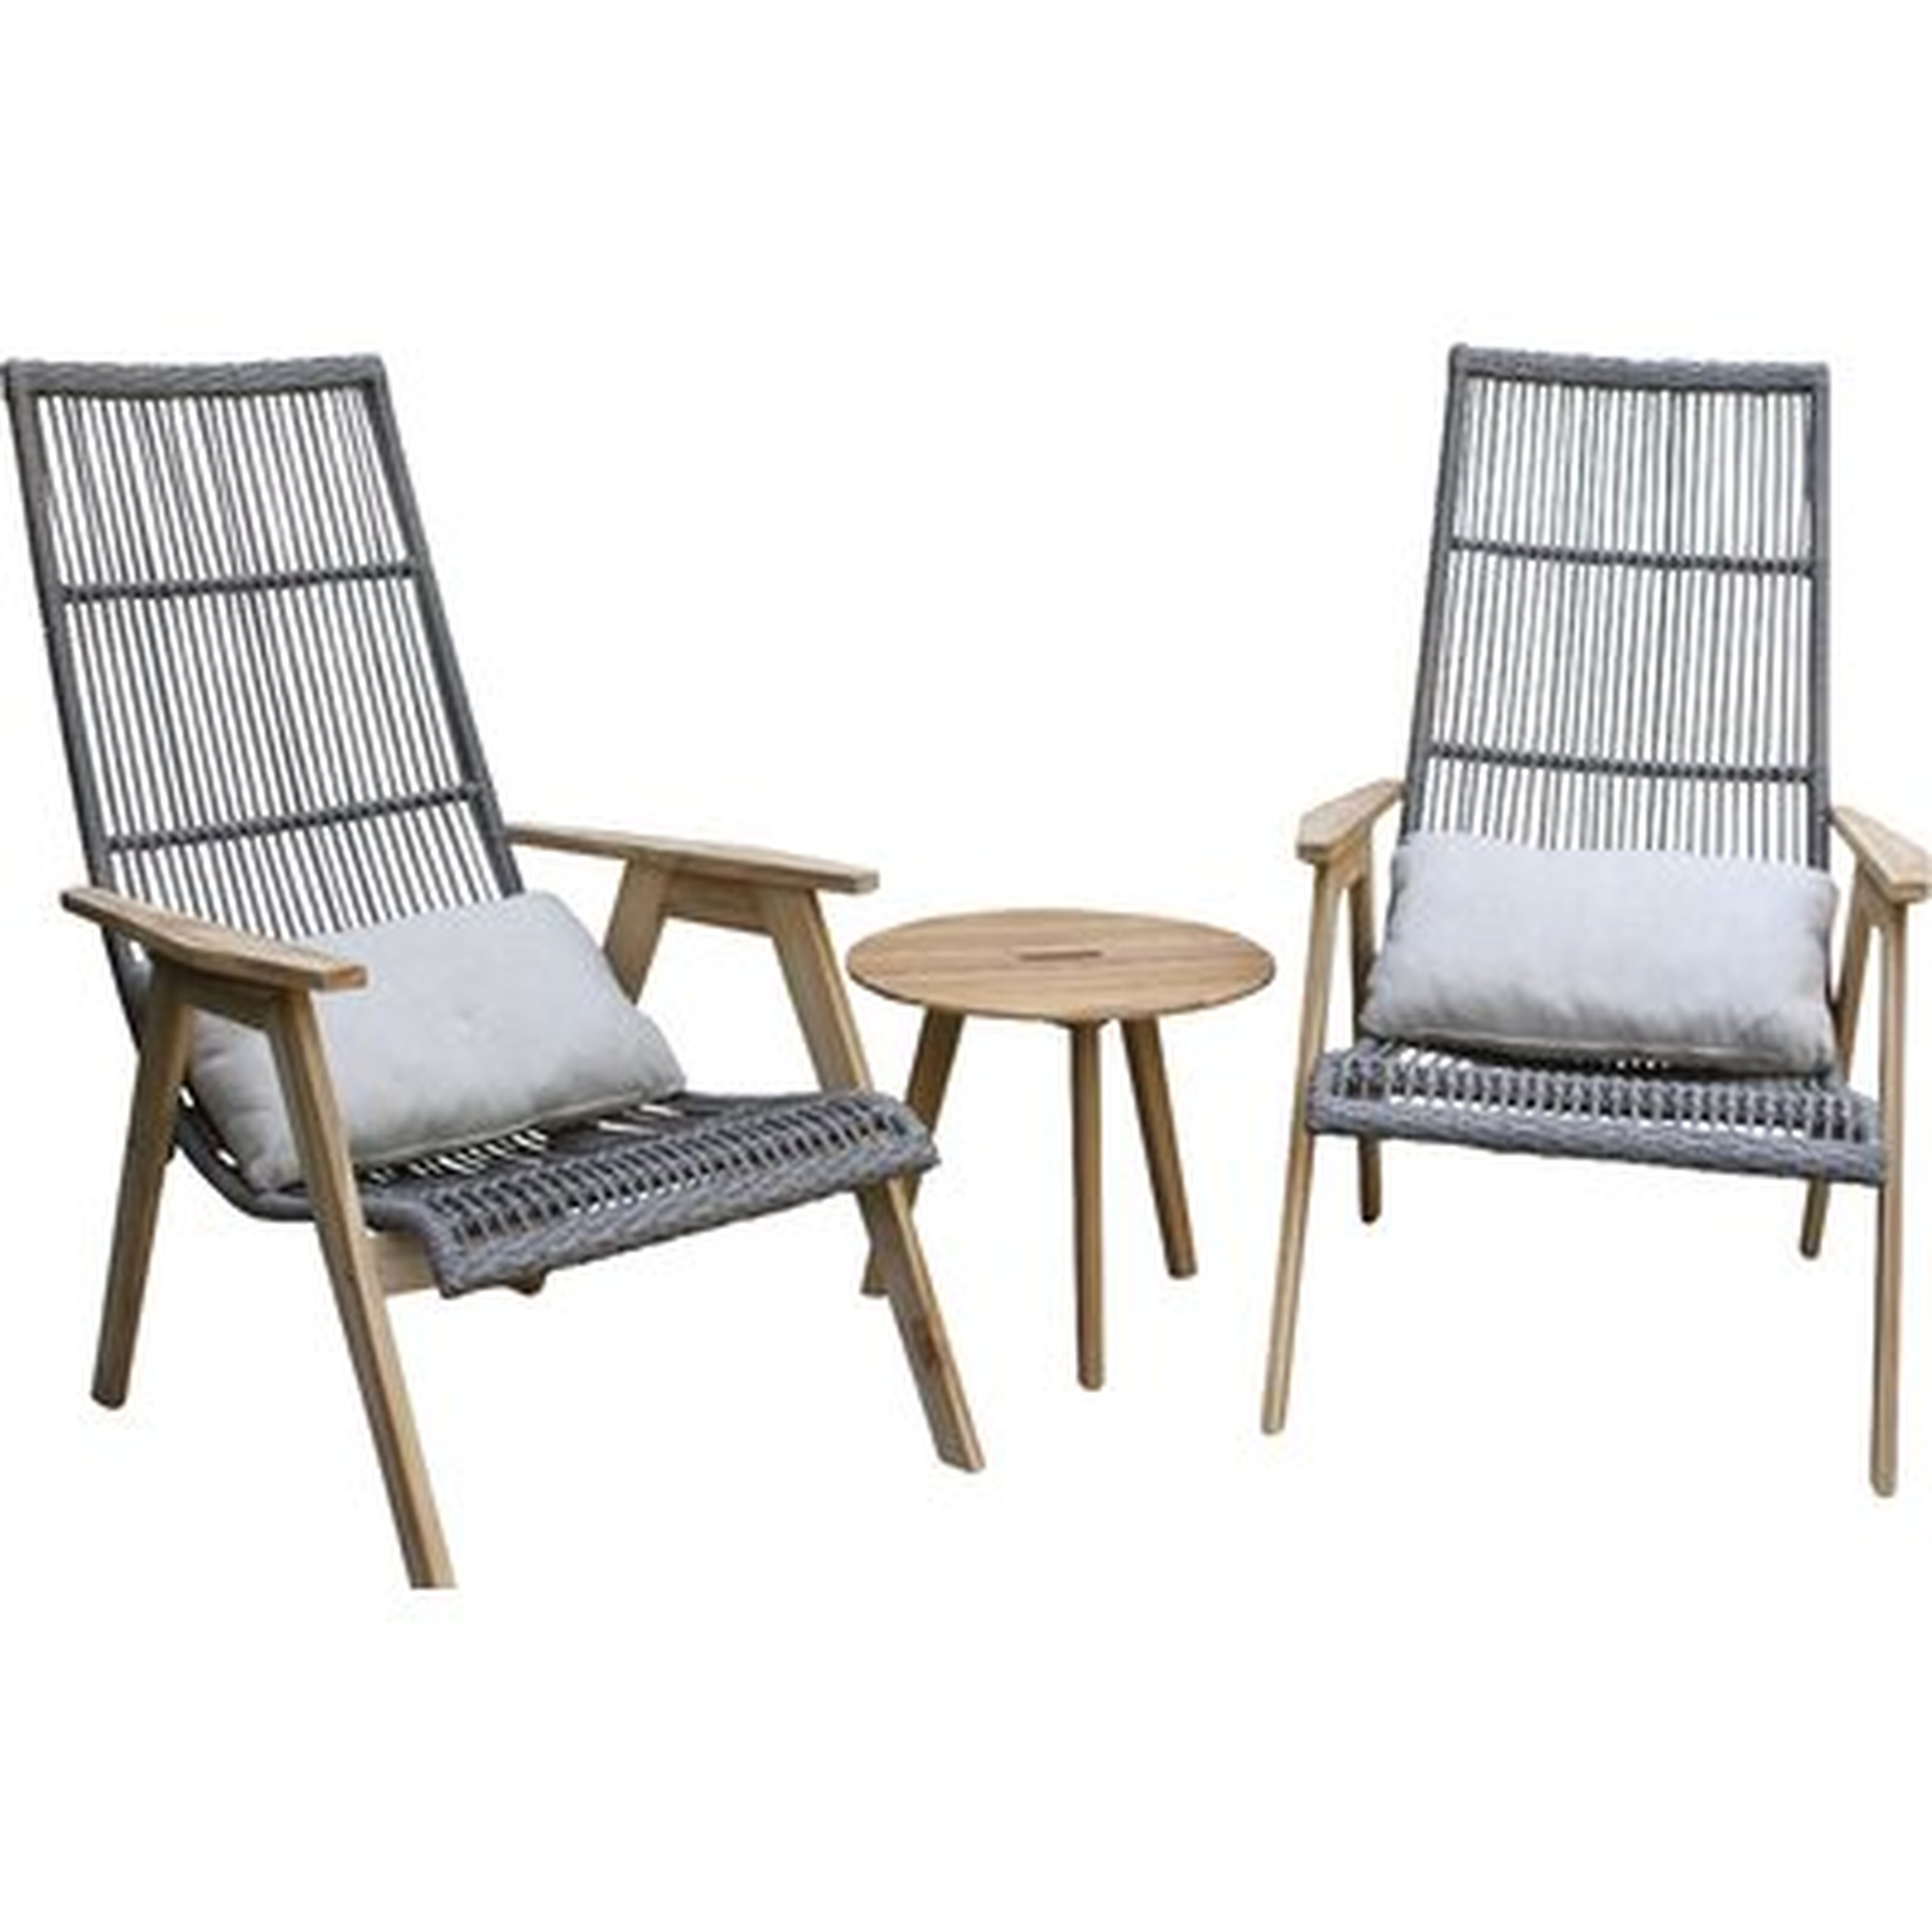 Largent Teak Patio Chair with Cushions -set of 2 - AllModern